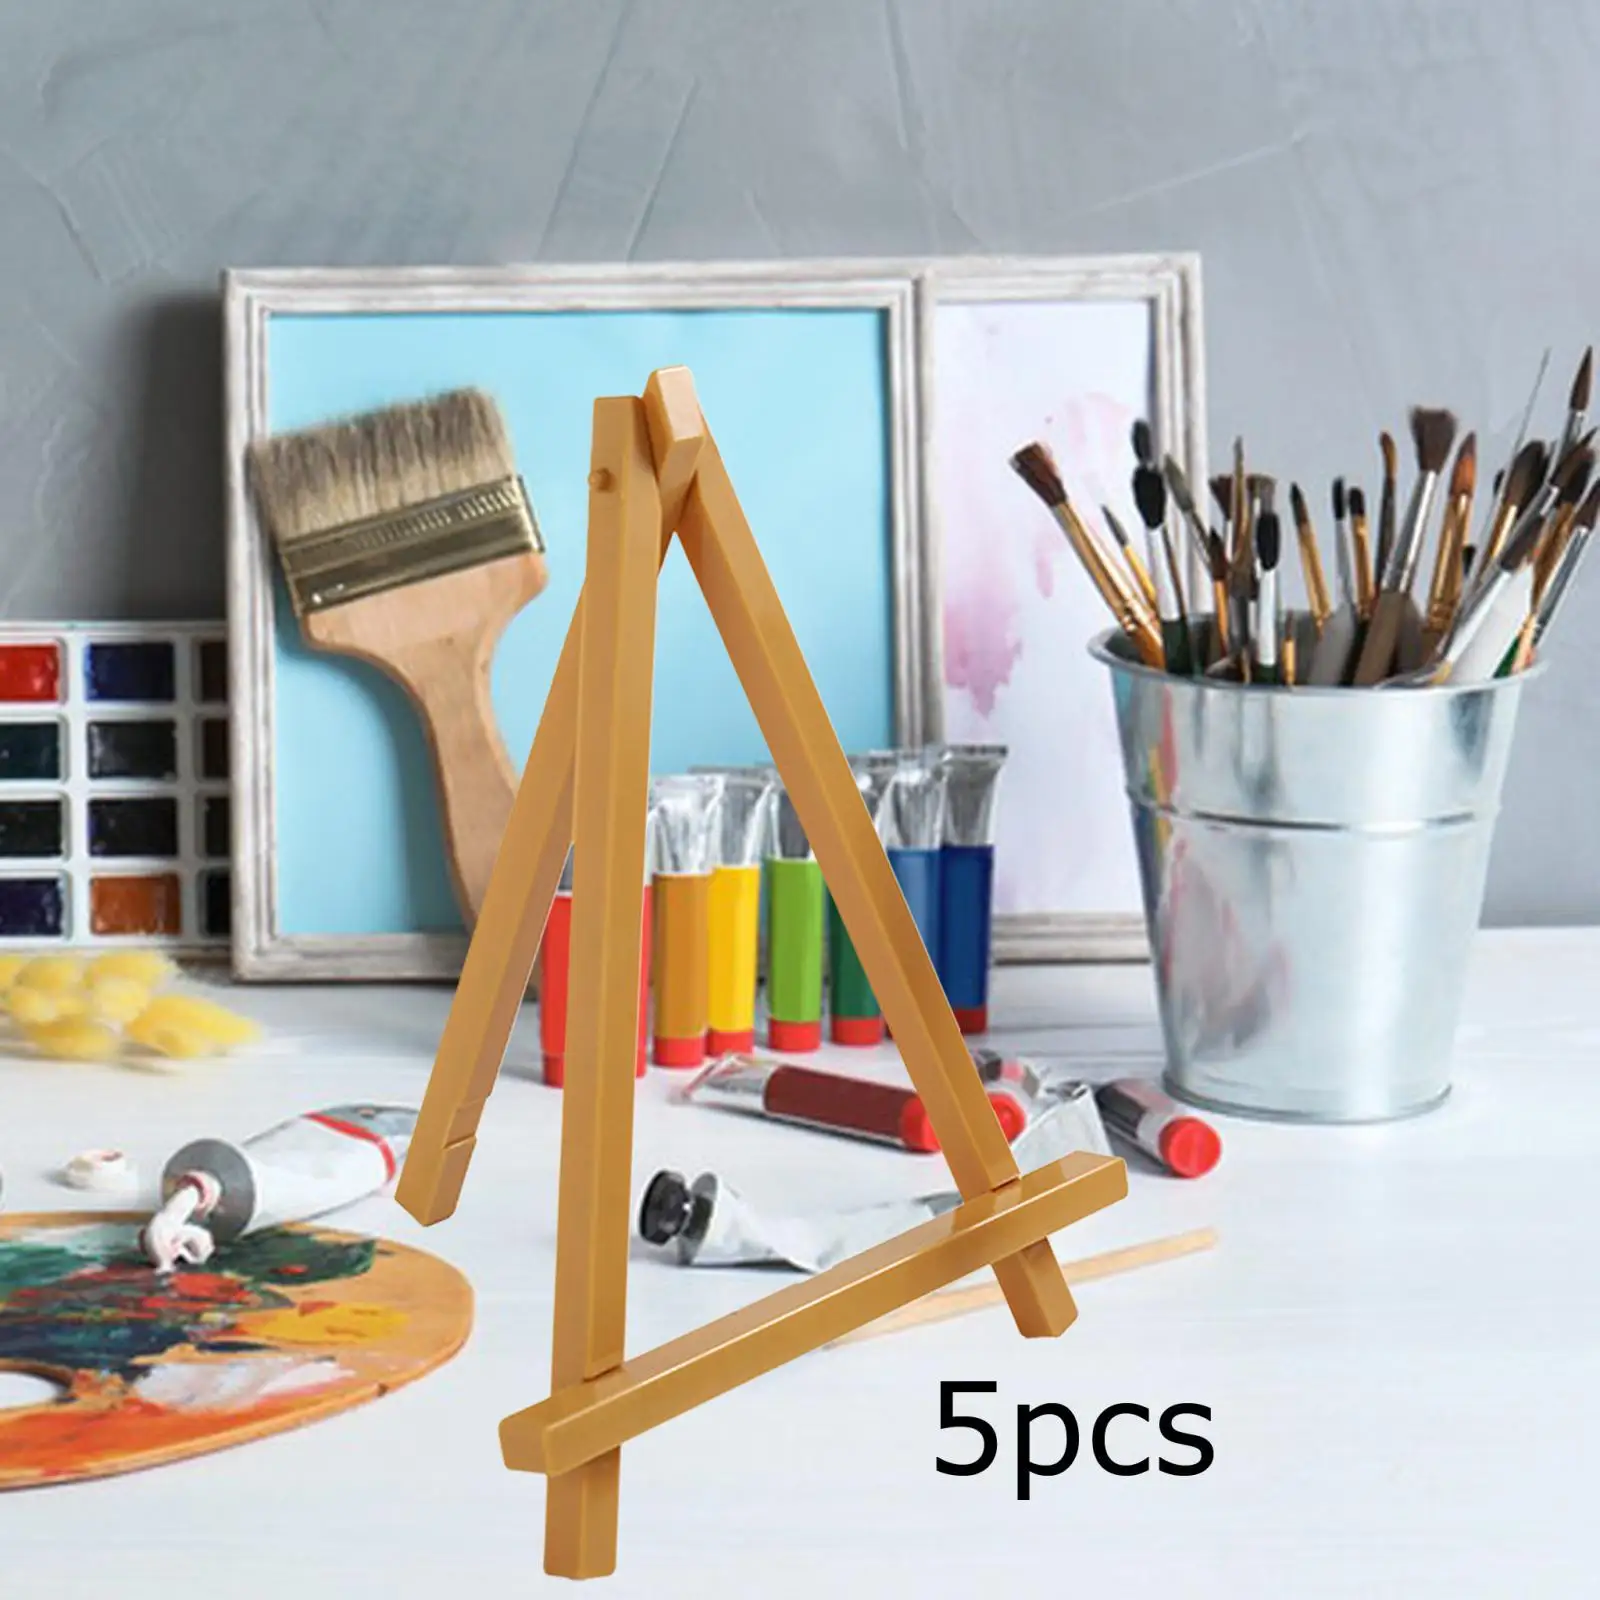 5x Mini Wooden Easel Holder Posters Photo Picture Cemetery Number Card Stand Art Boards for Painting Canvas Tripod Display Easel